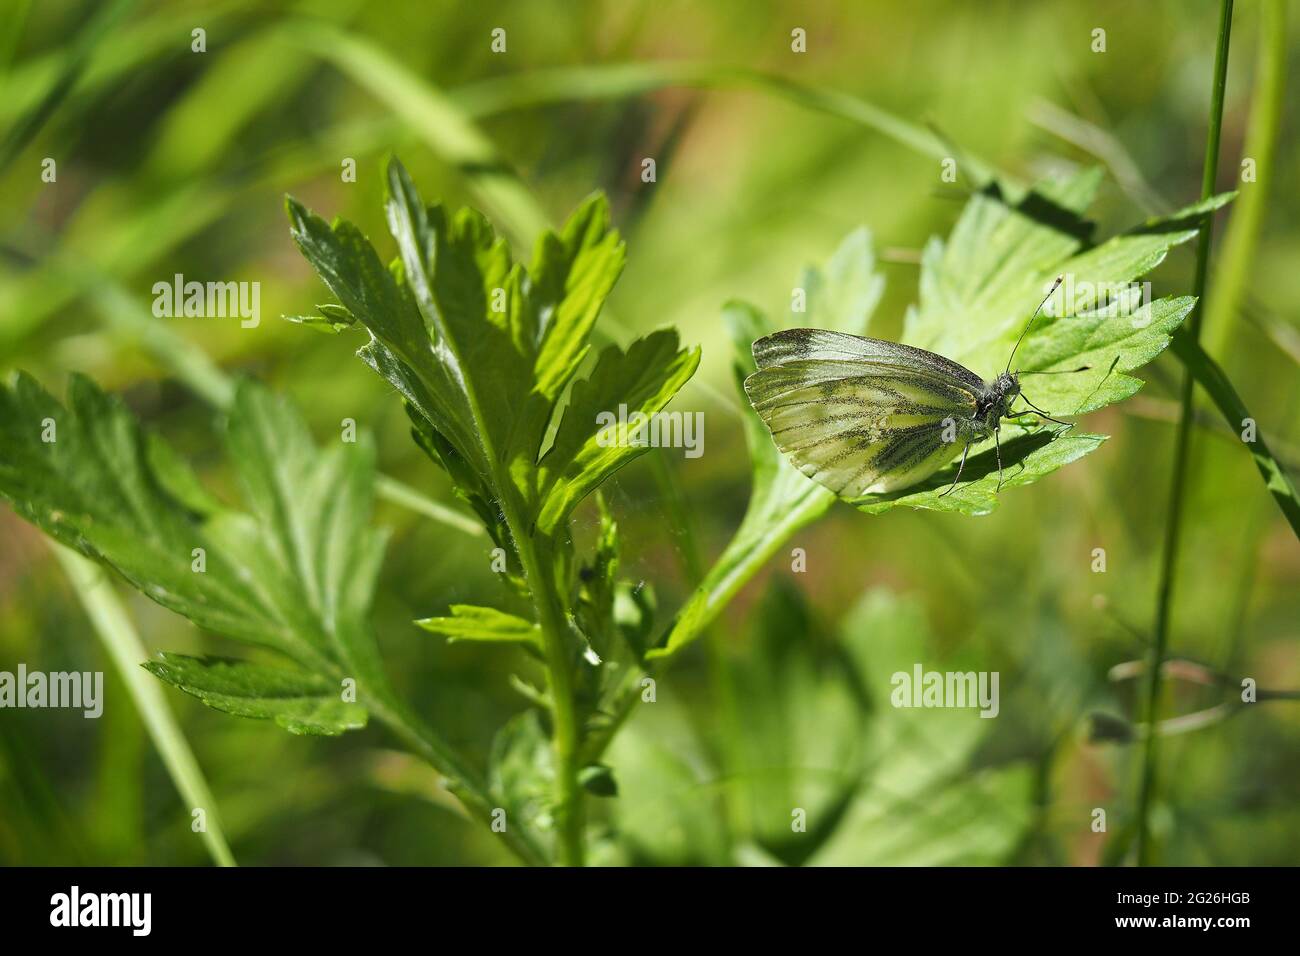 Macro shooting of insects in wildlife, close-up butterfly sits on the grass. Stock Photo